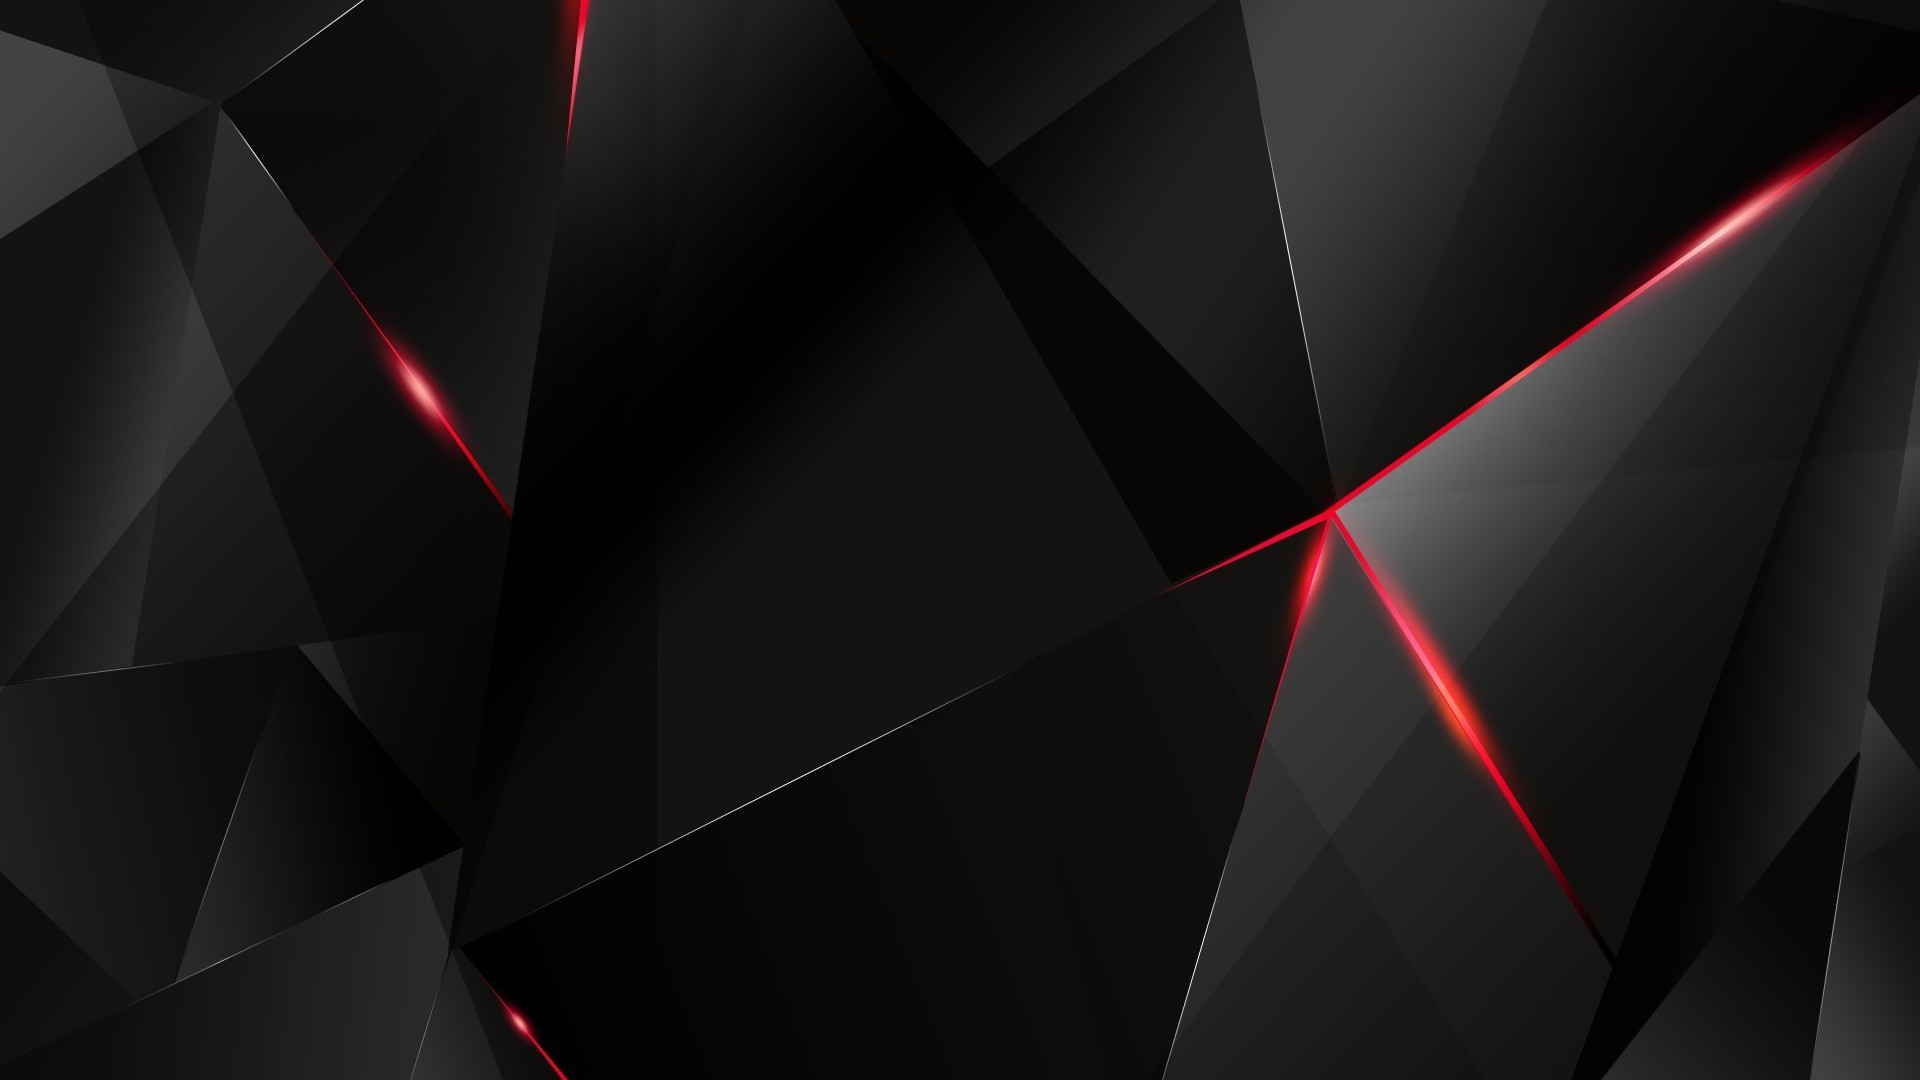 Red Black Abstract Wallpaper newhairstylesformen2014com